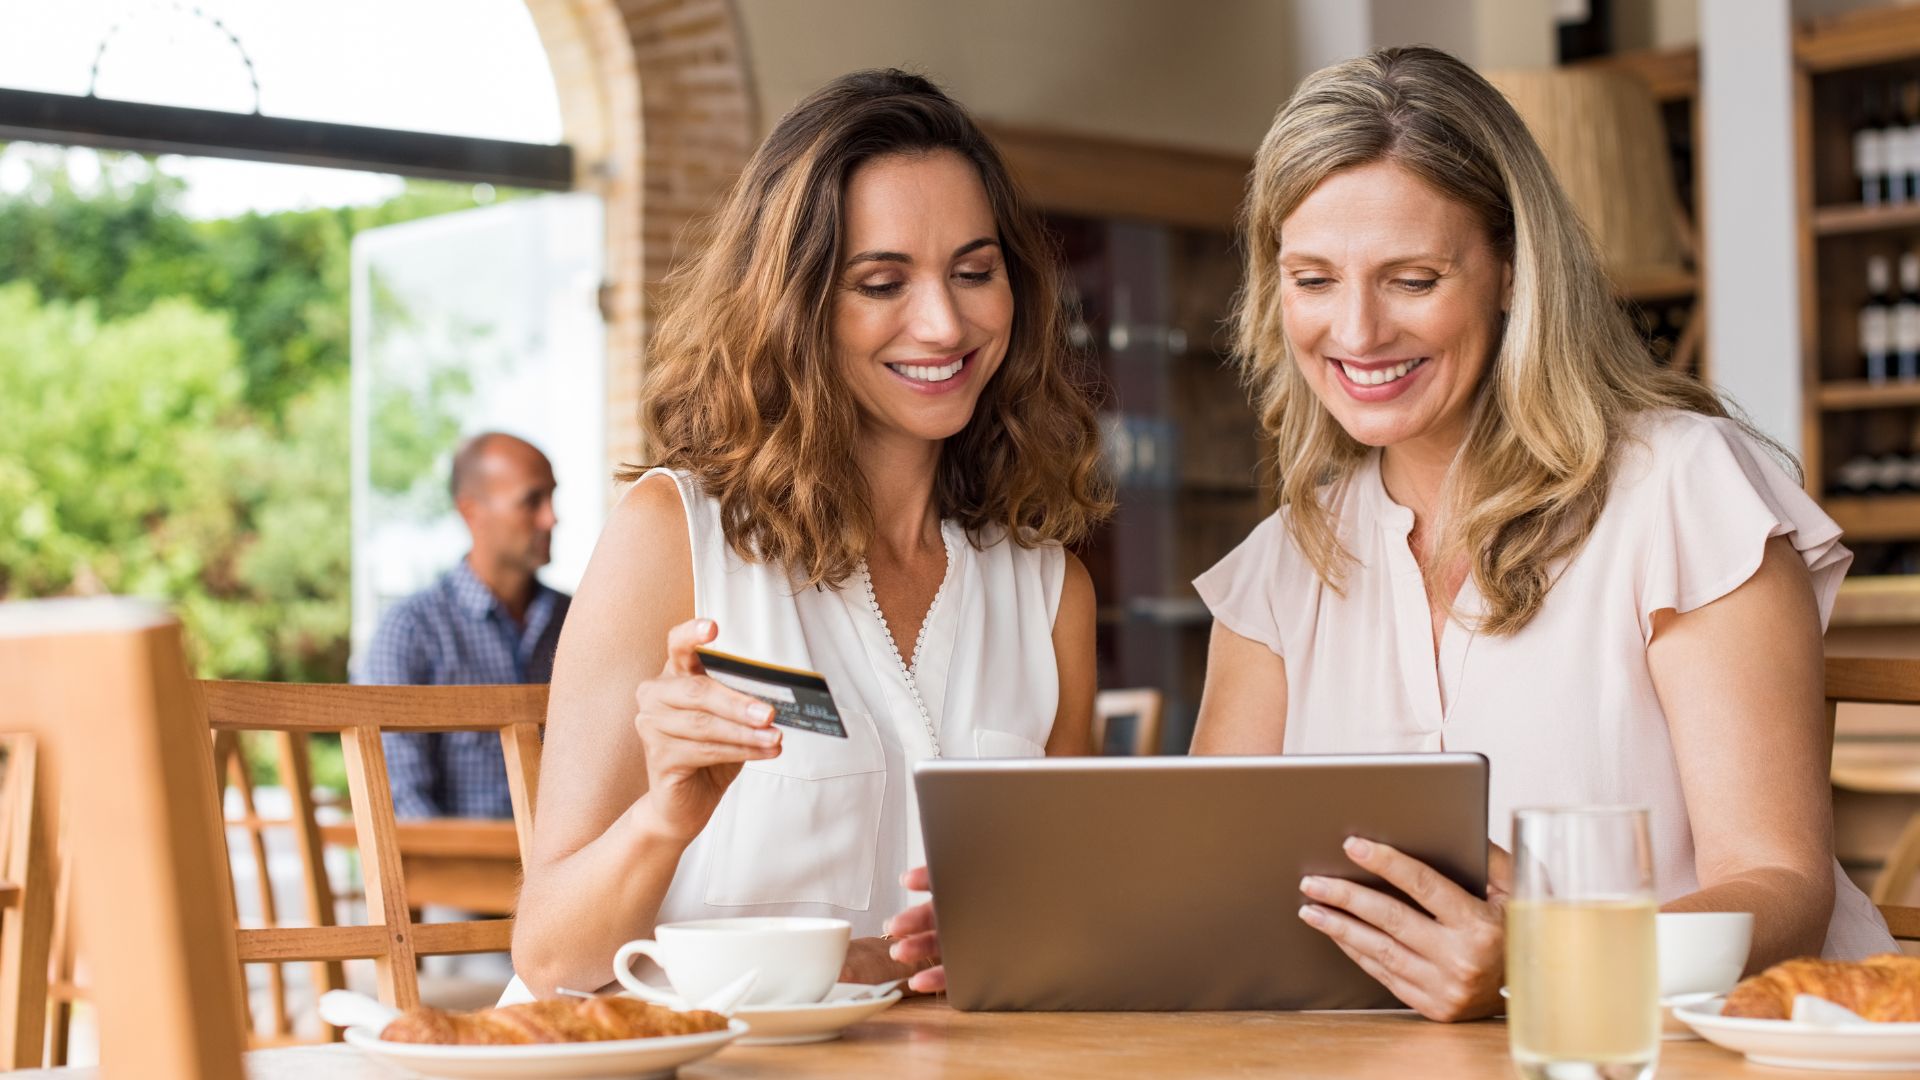 Two women wearing white blouses working together at an aesthetic café in Bali while having breakfast croissants and hot latte cafes want to make payments using credit cards via ipad